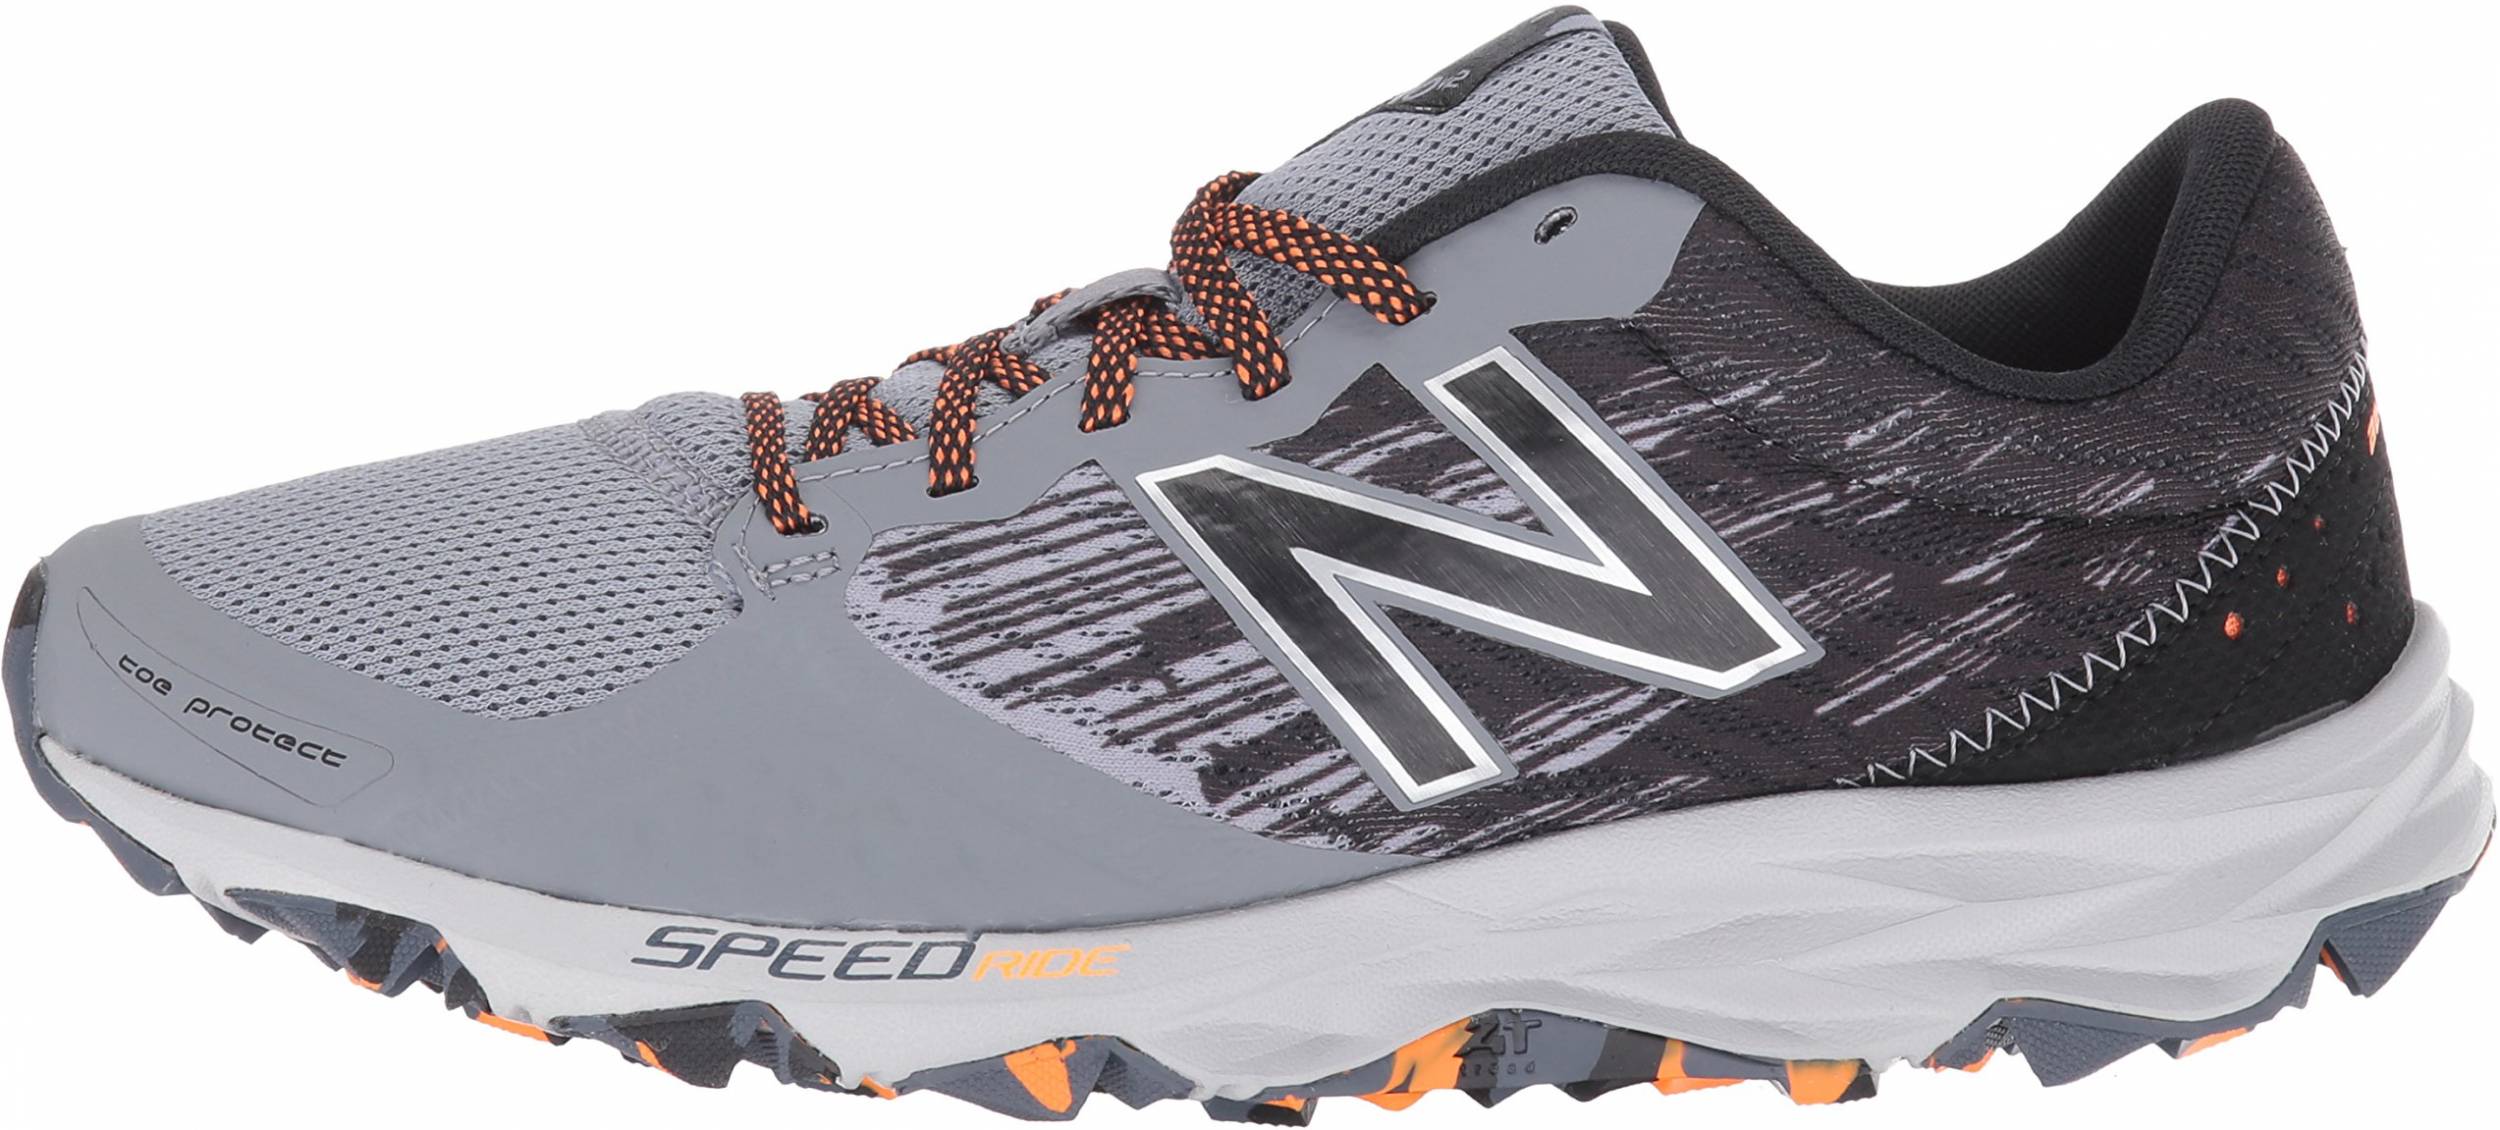 new balance 690 review